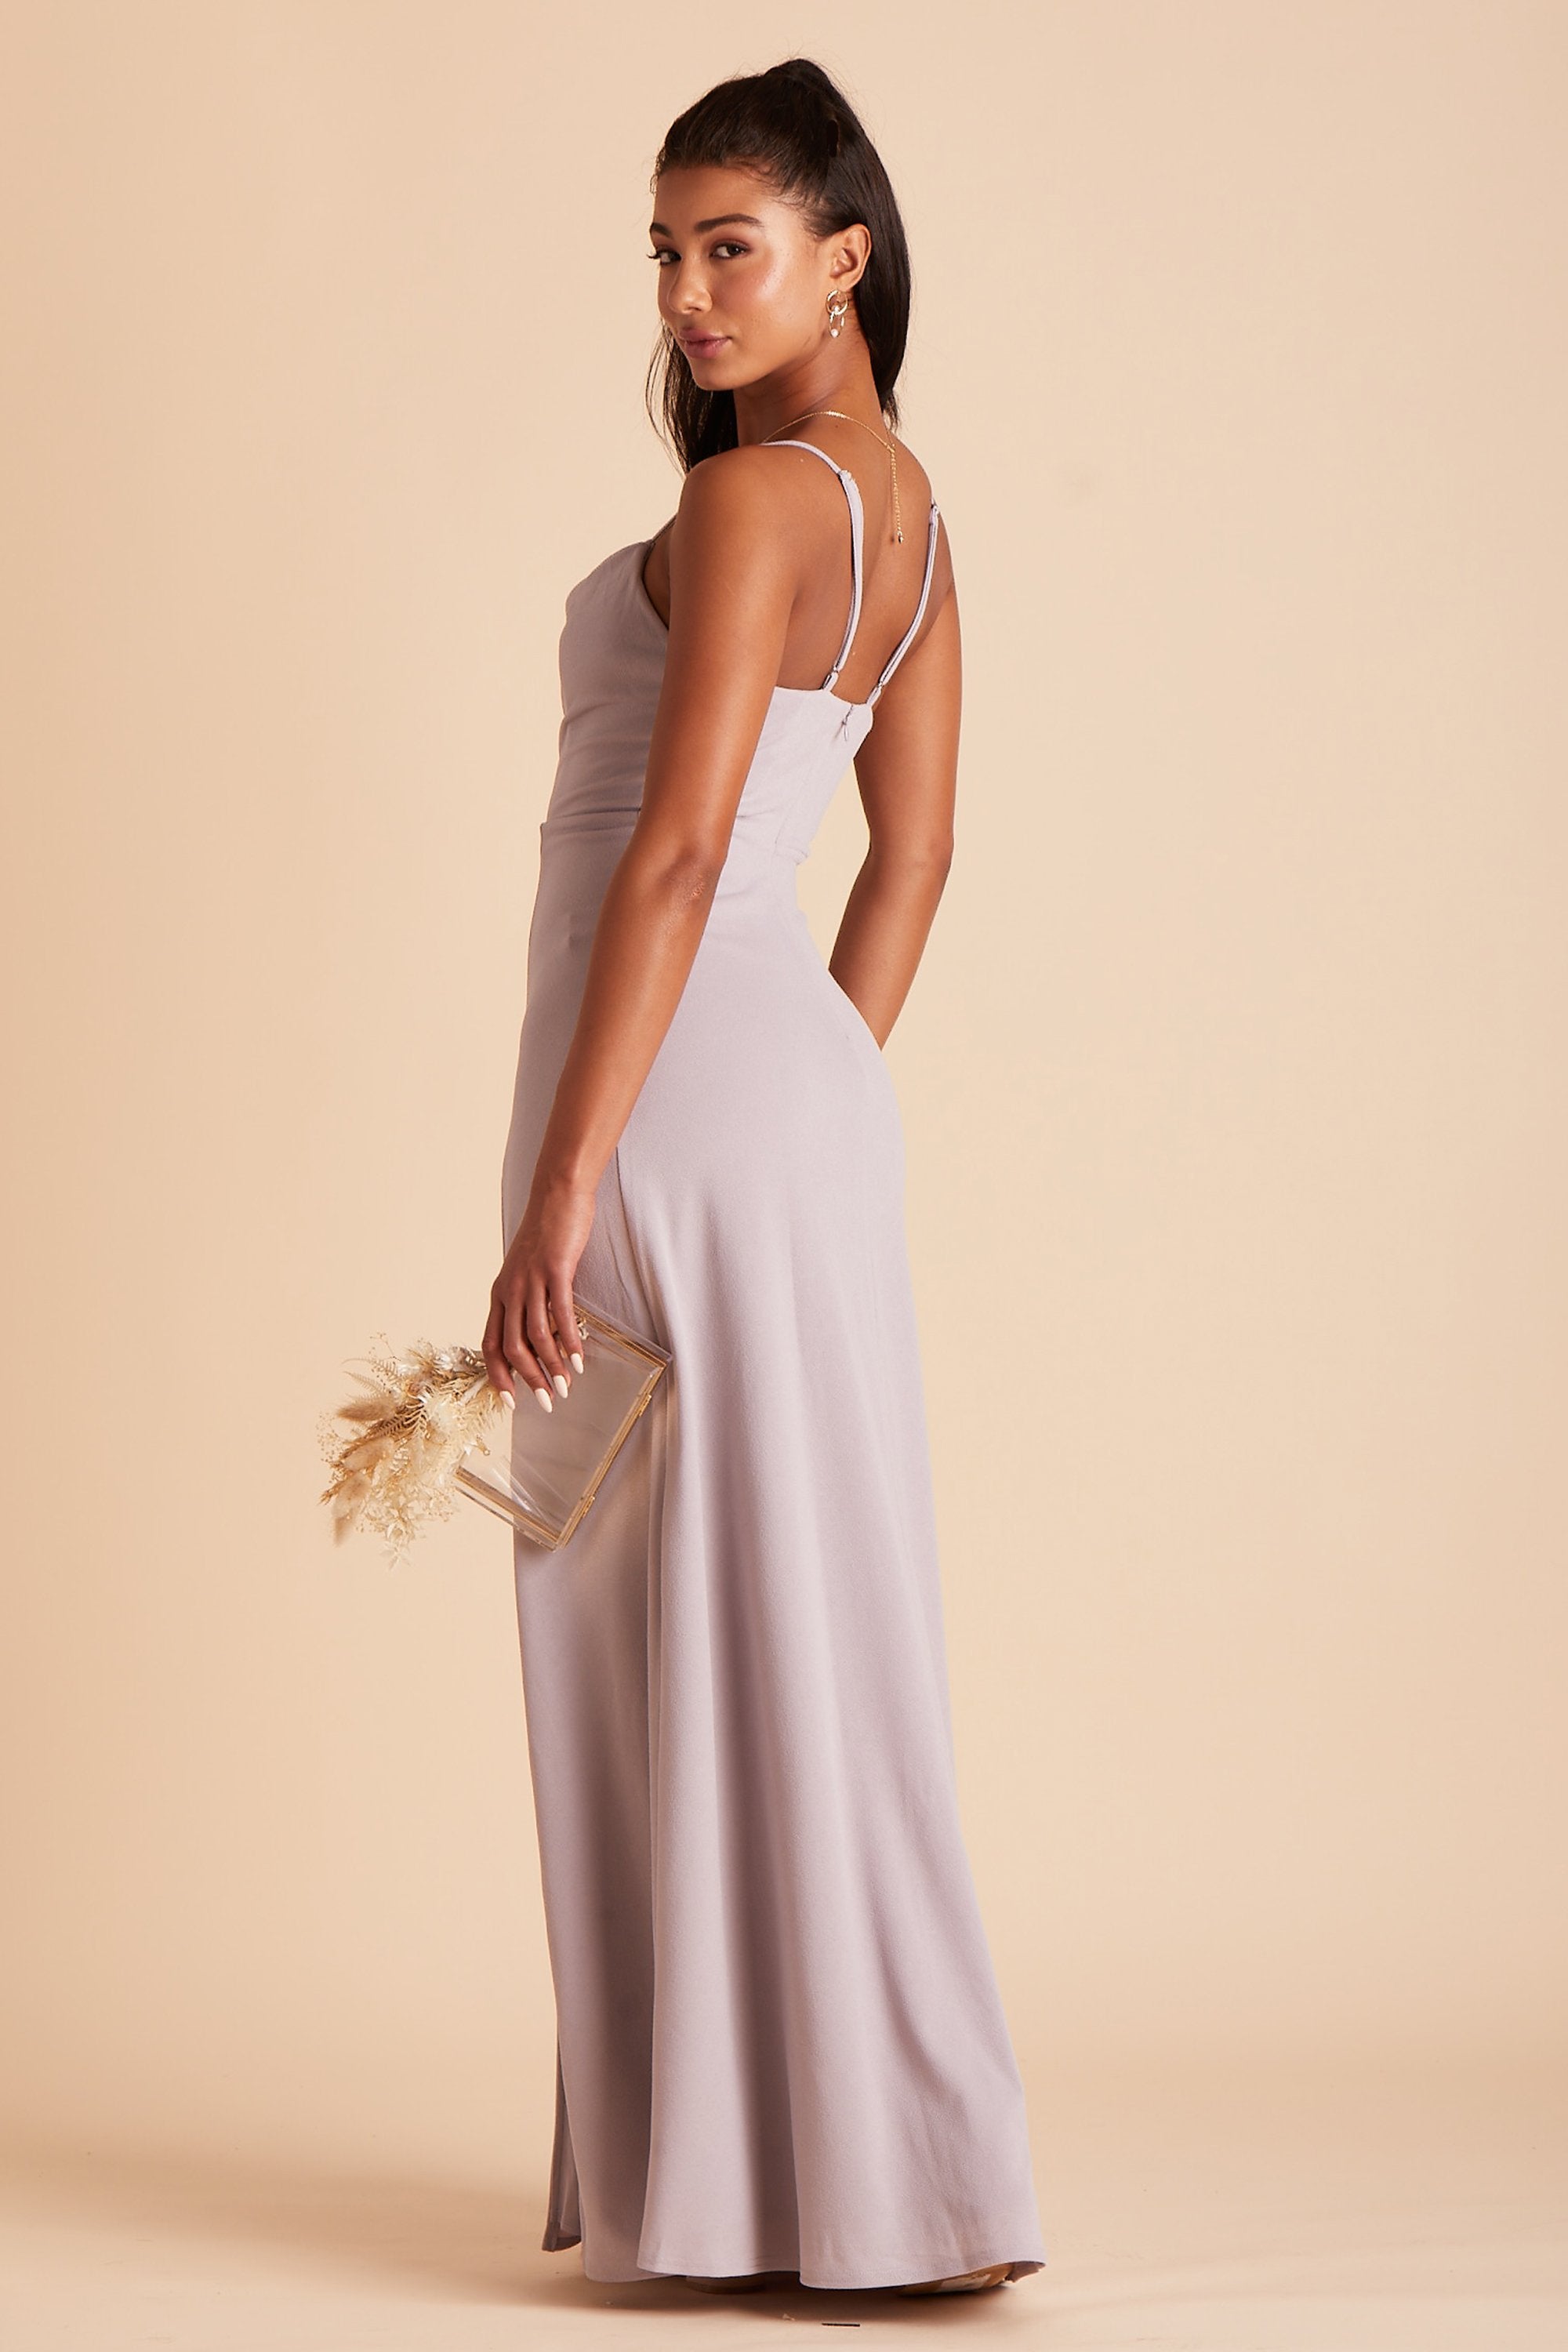 Ash bridesmaid dress in lilac purple crepe by Birdy Grey, side view